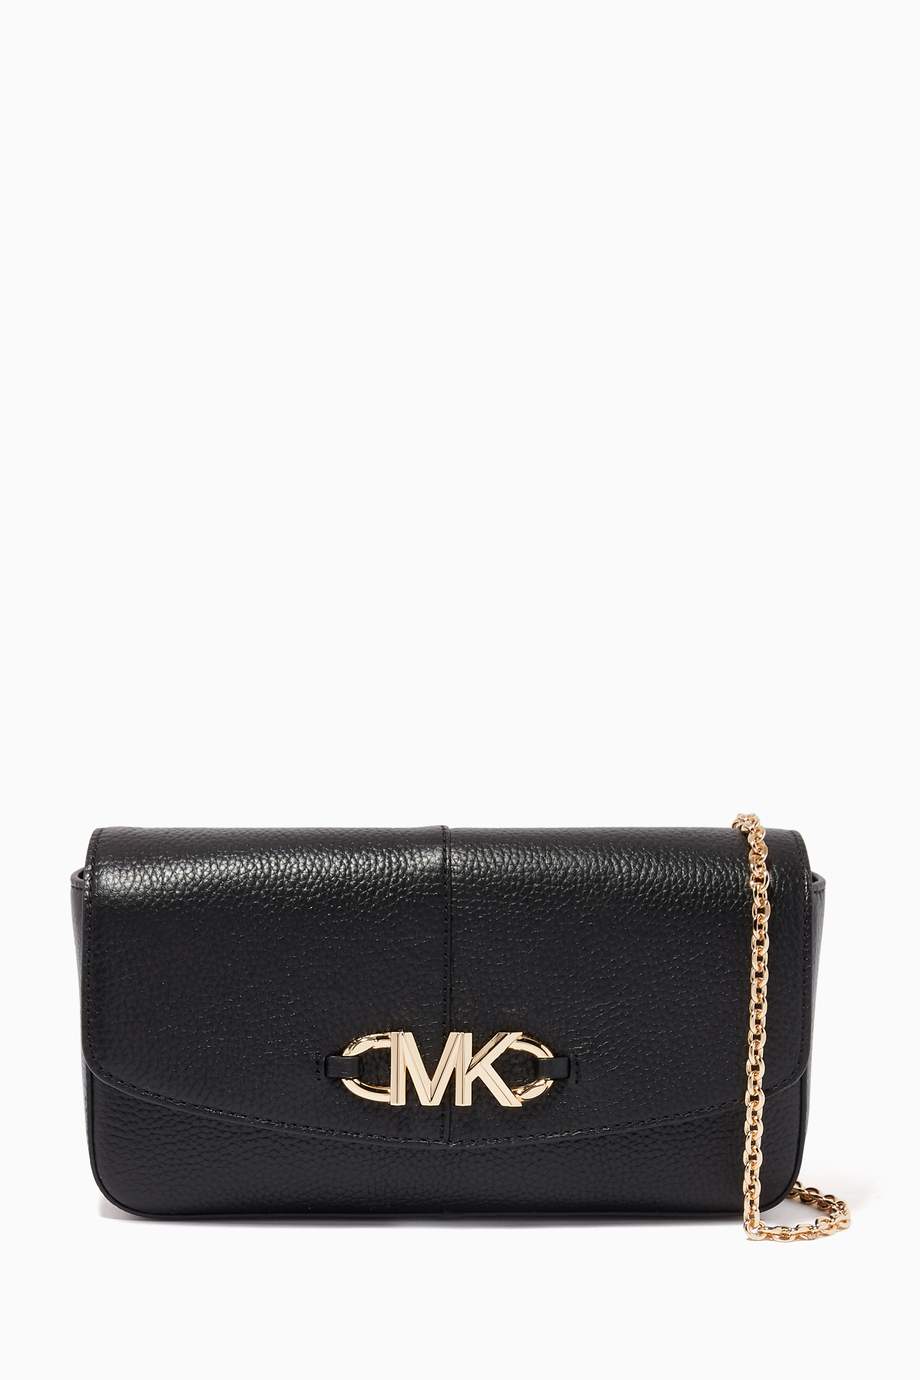 Shop Michael Kors Black Large Izzy Clutch in Leather for Women | Ounass UAE